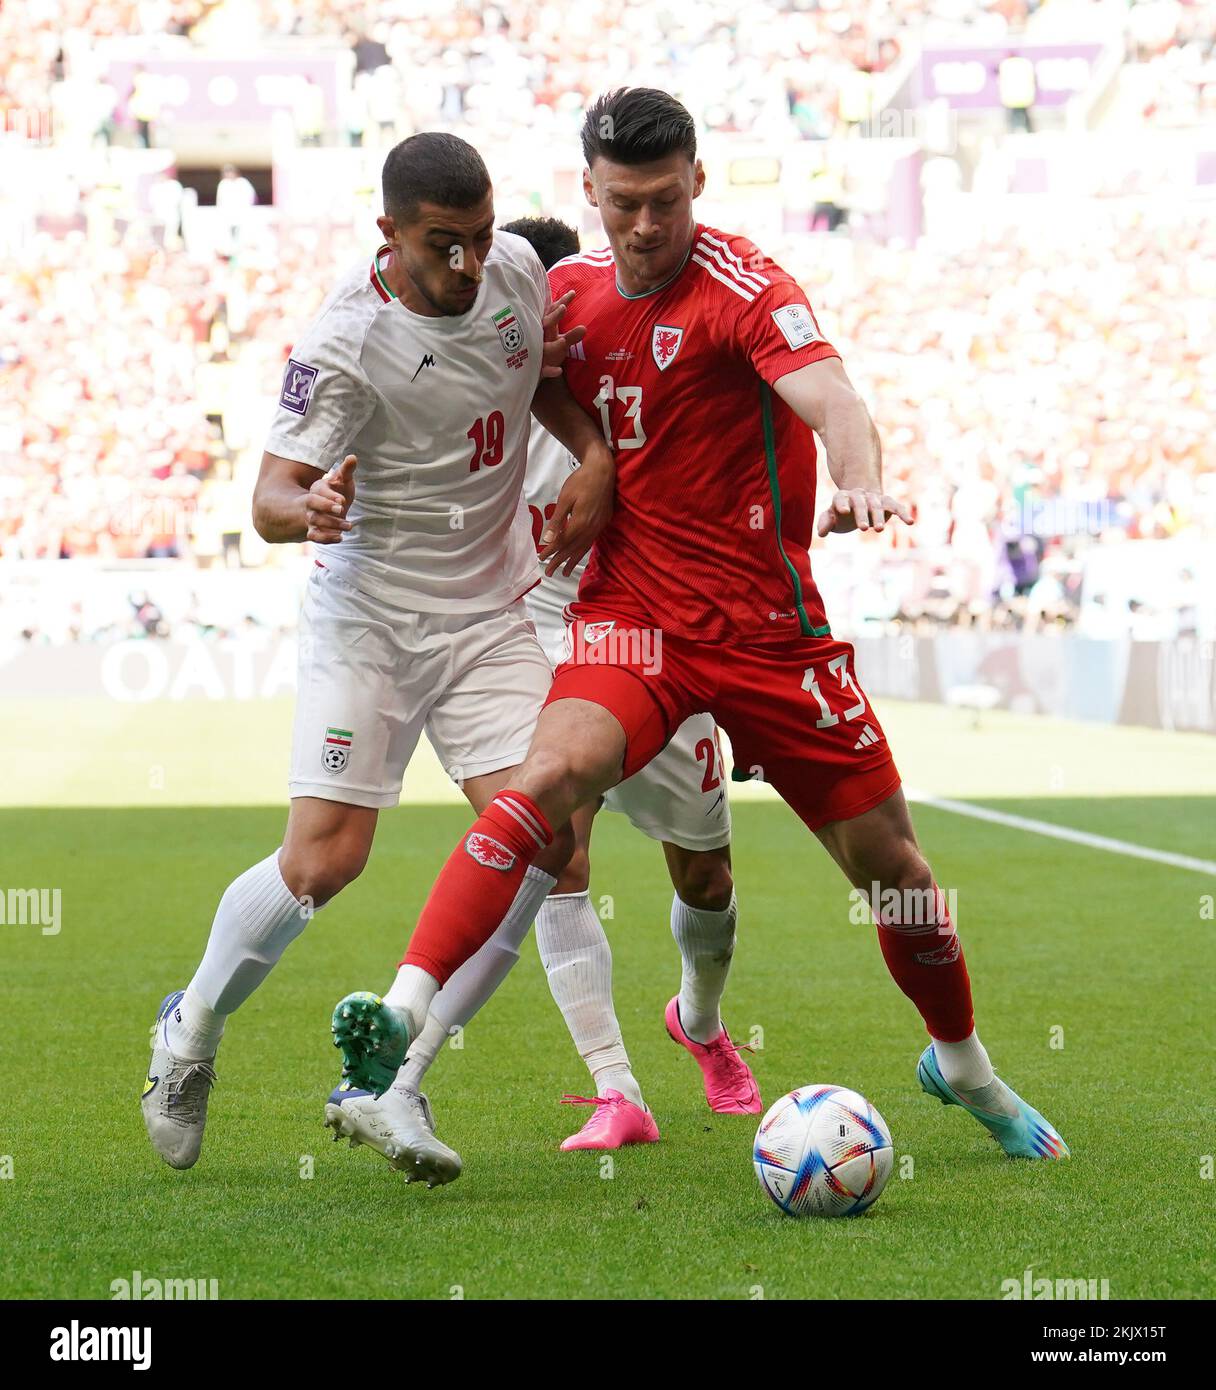 Iran's Majid Hosseini (left) and Wales' Kieffer Moore battle for the ball during the FIFA World Cup Group B match at the Ahmad Bin Ali Stadium, Al-Rayyan. Picture date: Friday November 25, 2022. Stock Photo